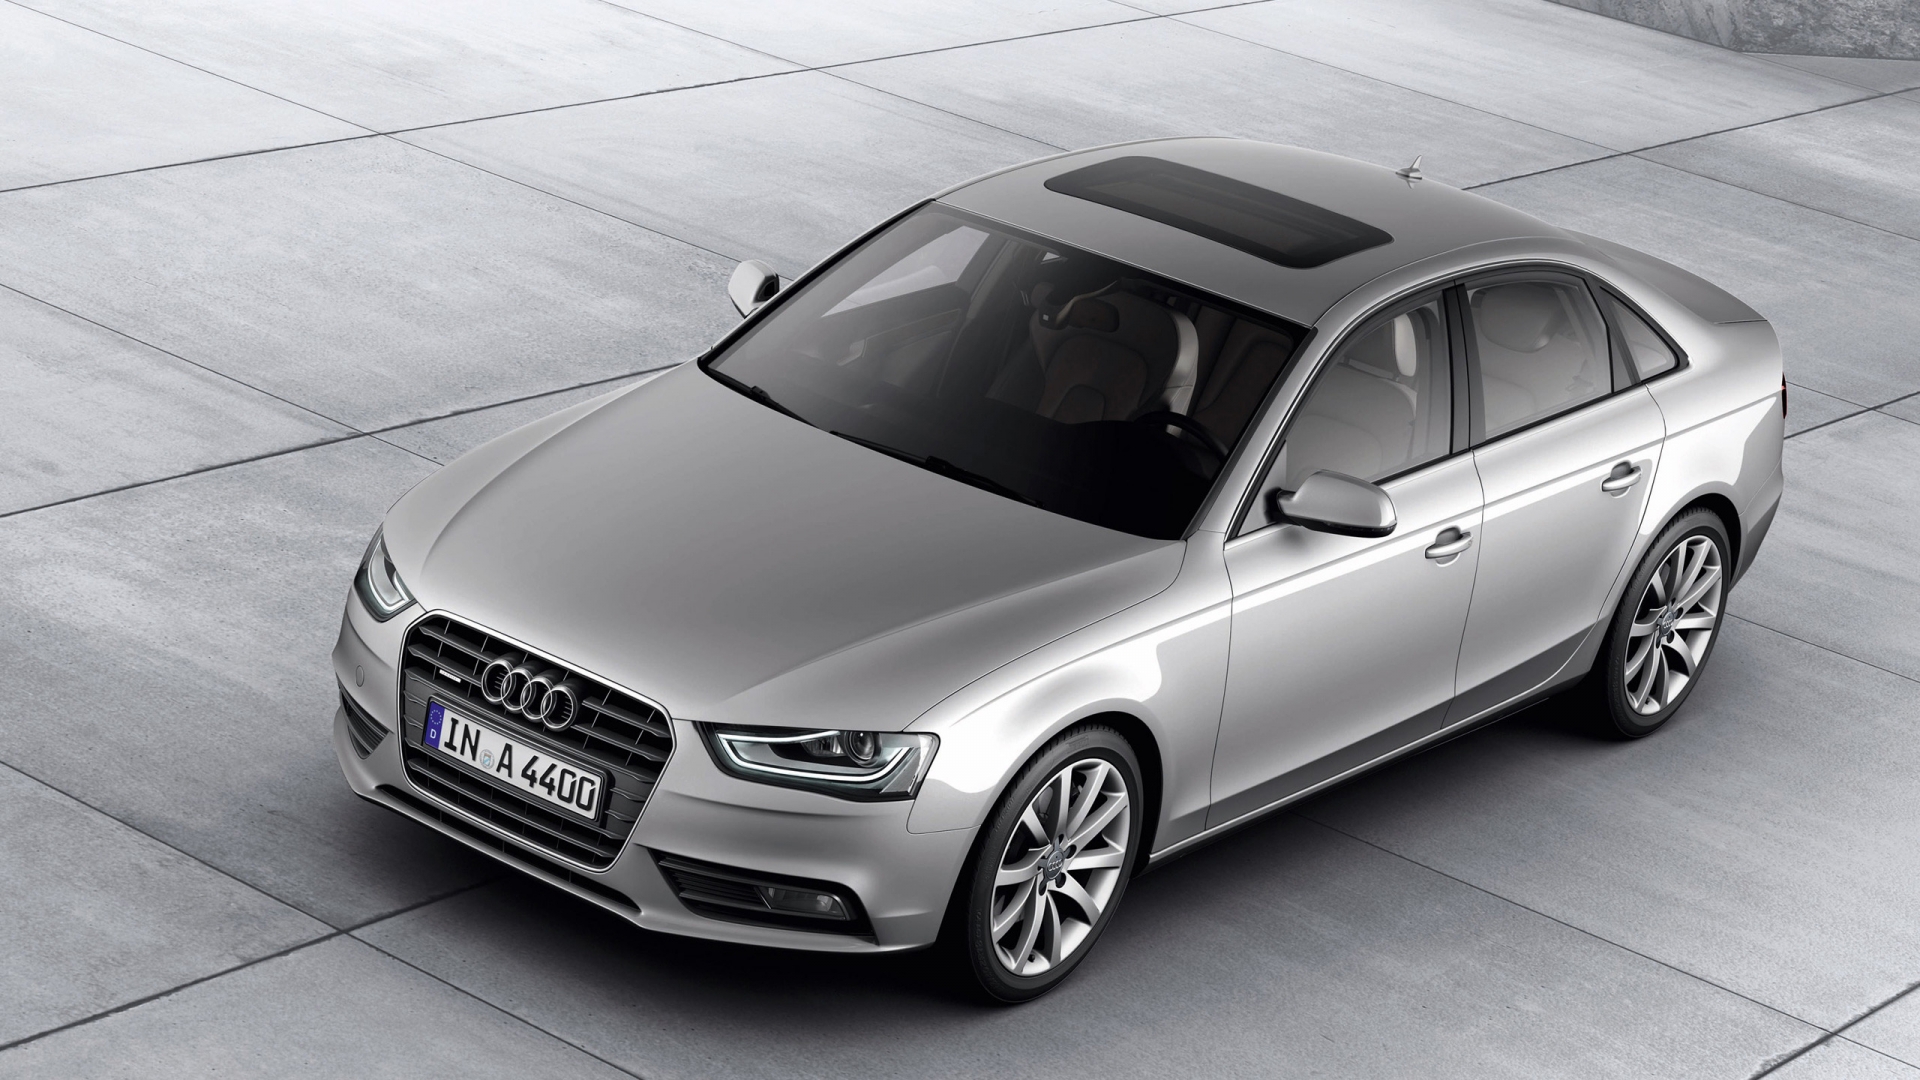 2012 Audi A4 for 1920 x 1080 HDTV 1080p resolution